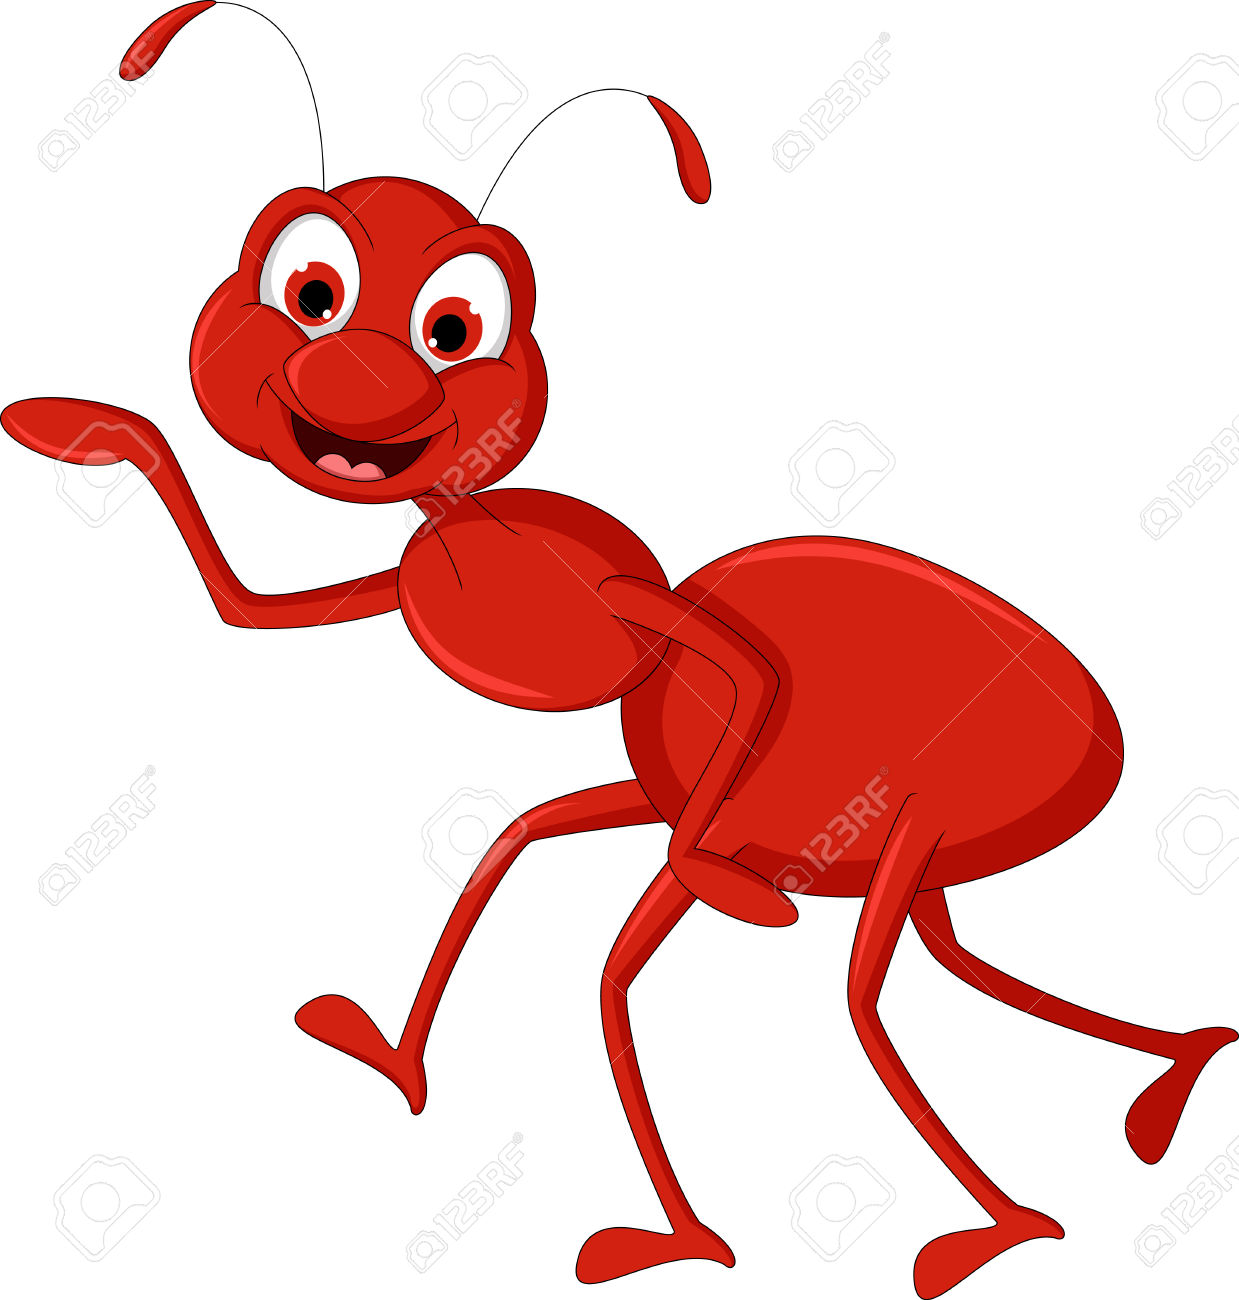 Ant clipart red ant. Station 